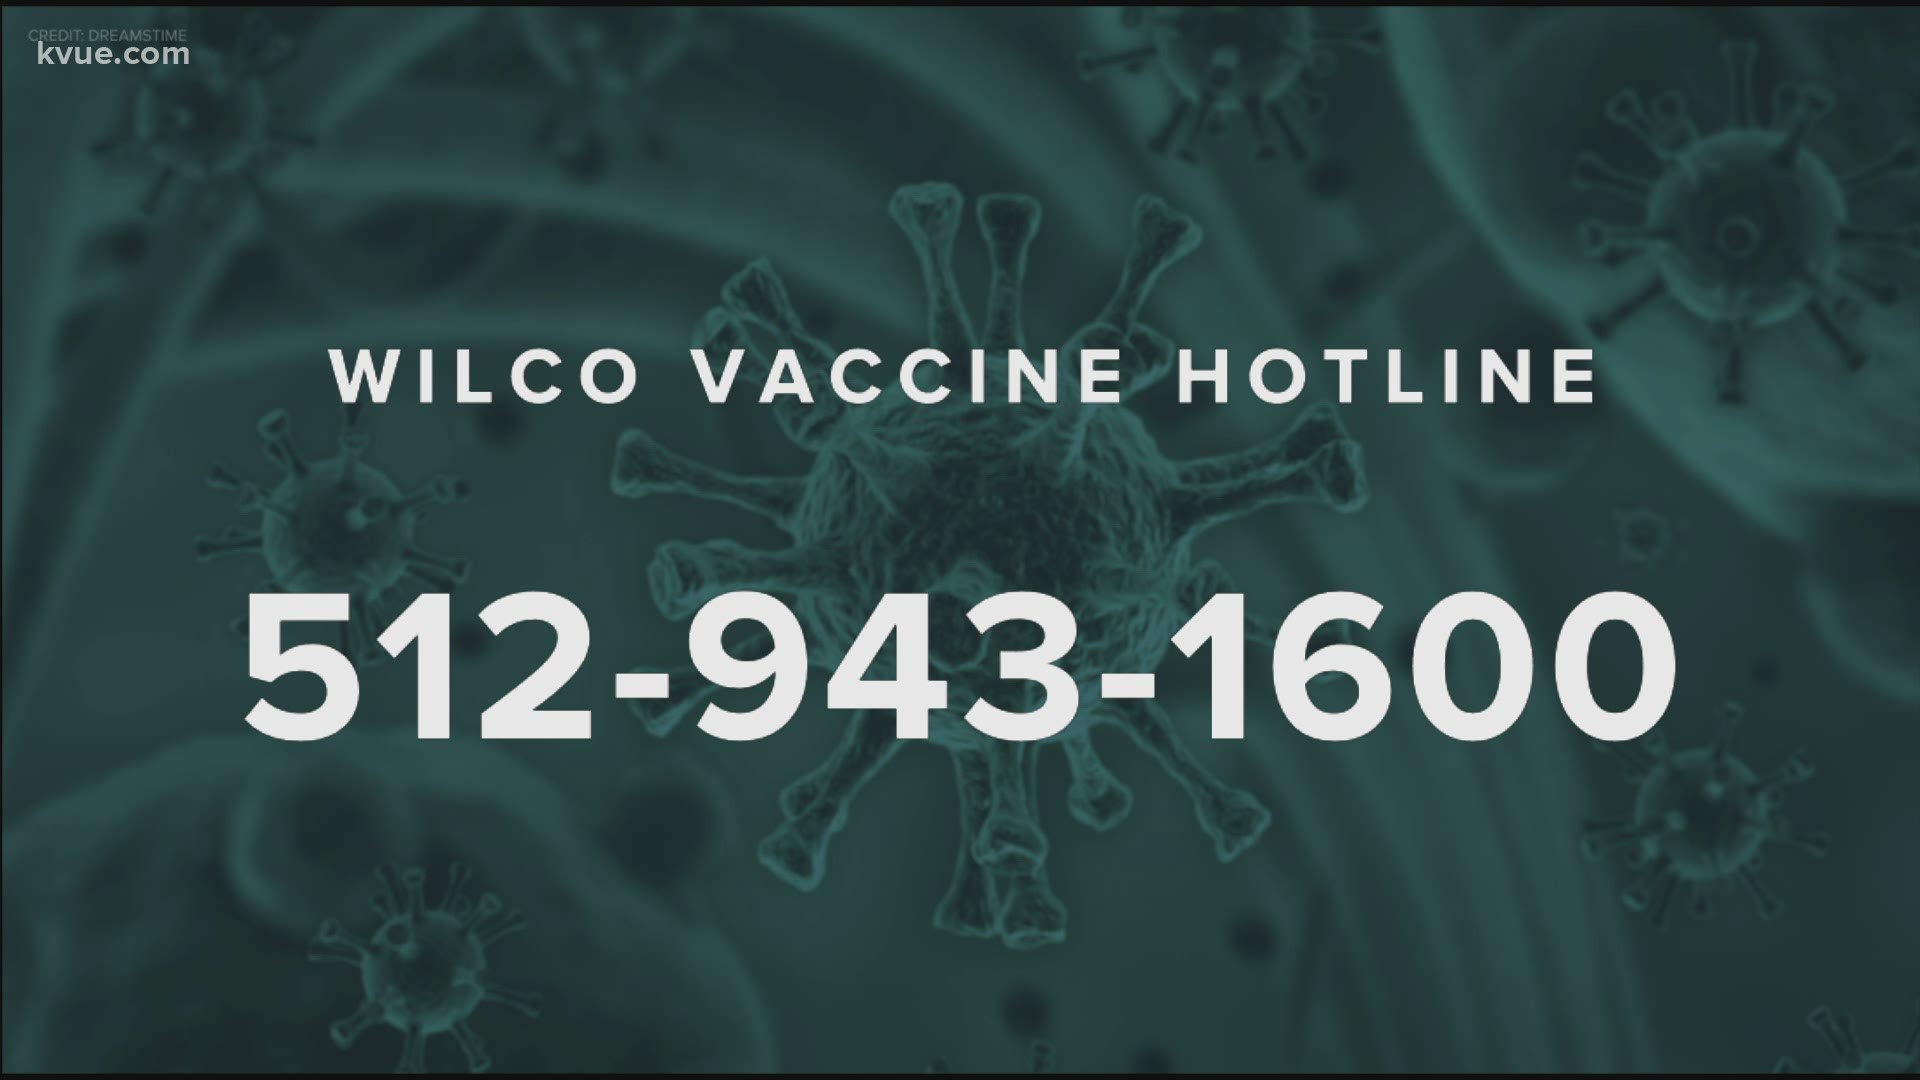 If you live in Williamson County and need information about the COVID-19 vaccine, there's a new hotline you can call. The number is 512-943-1600.